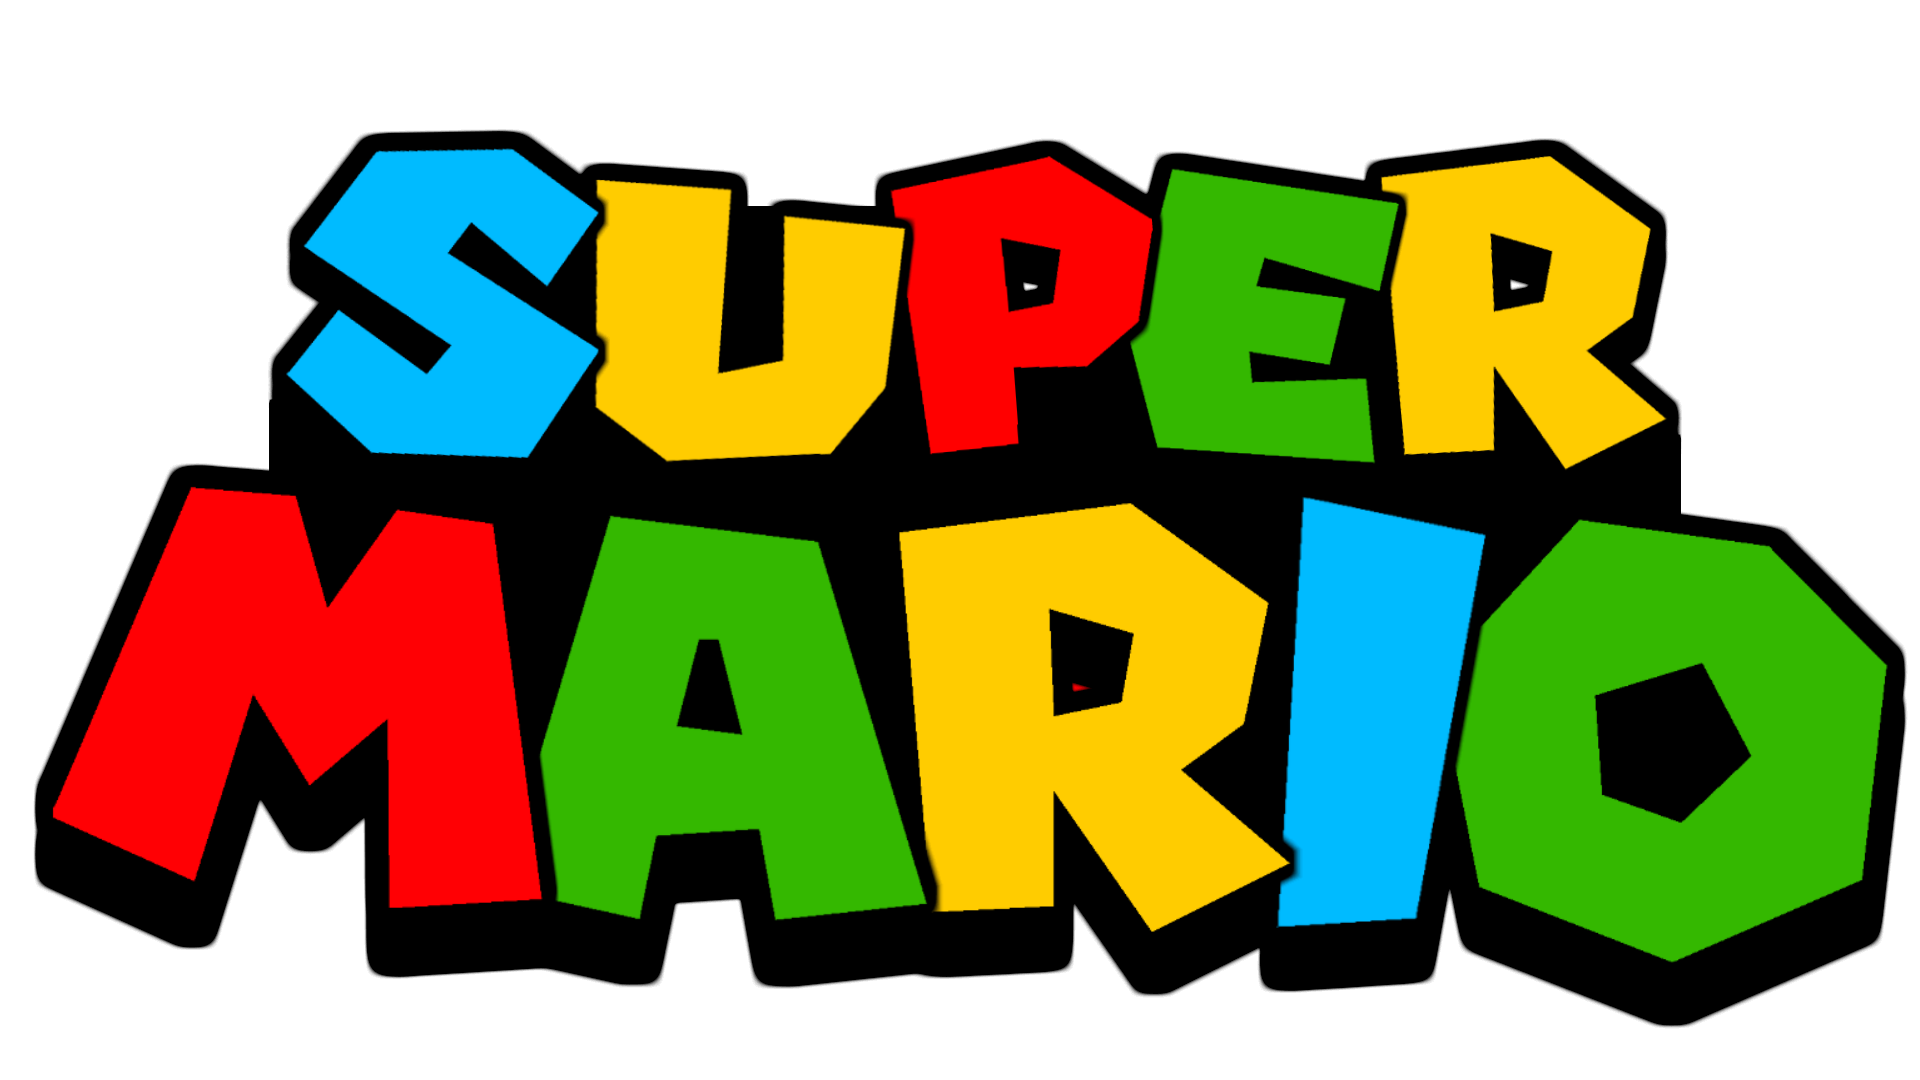 an image of the logo from the game Super Mario